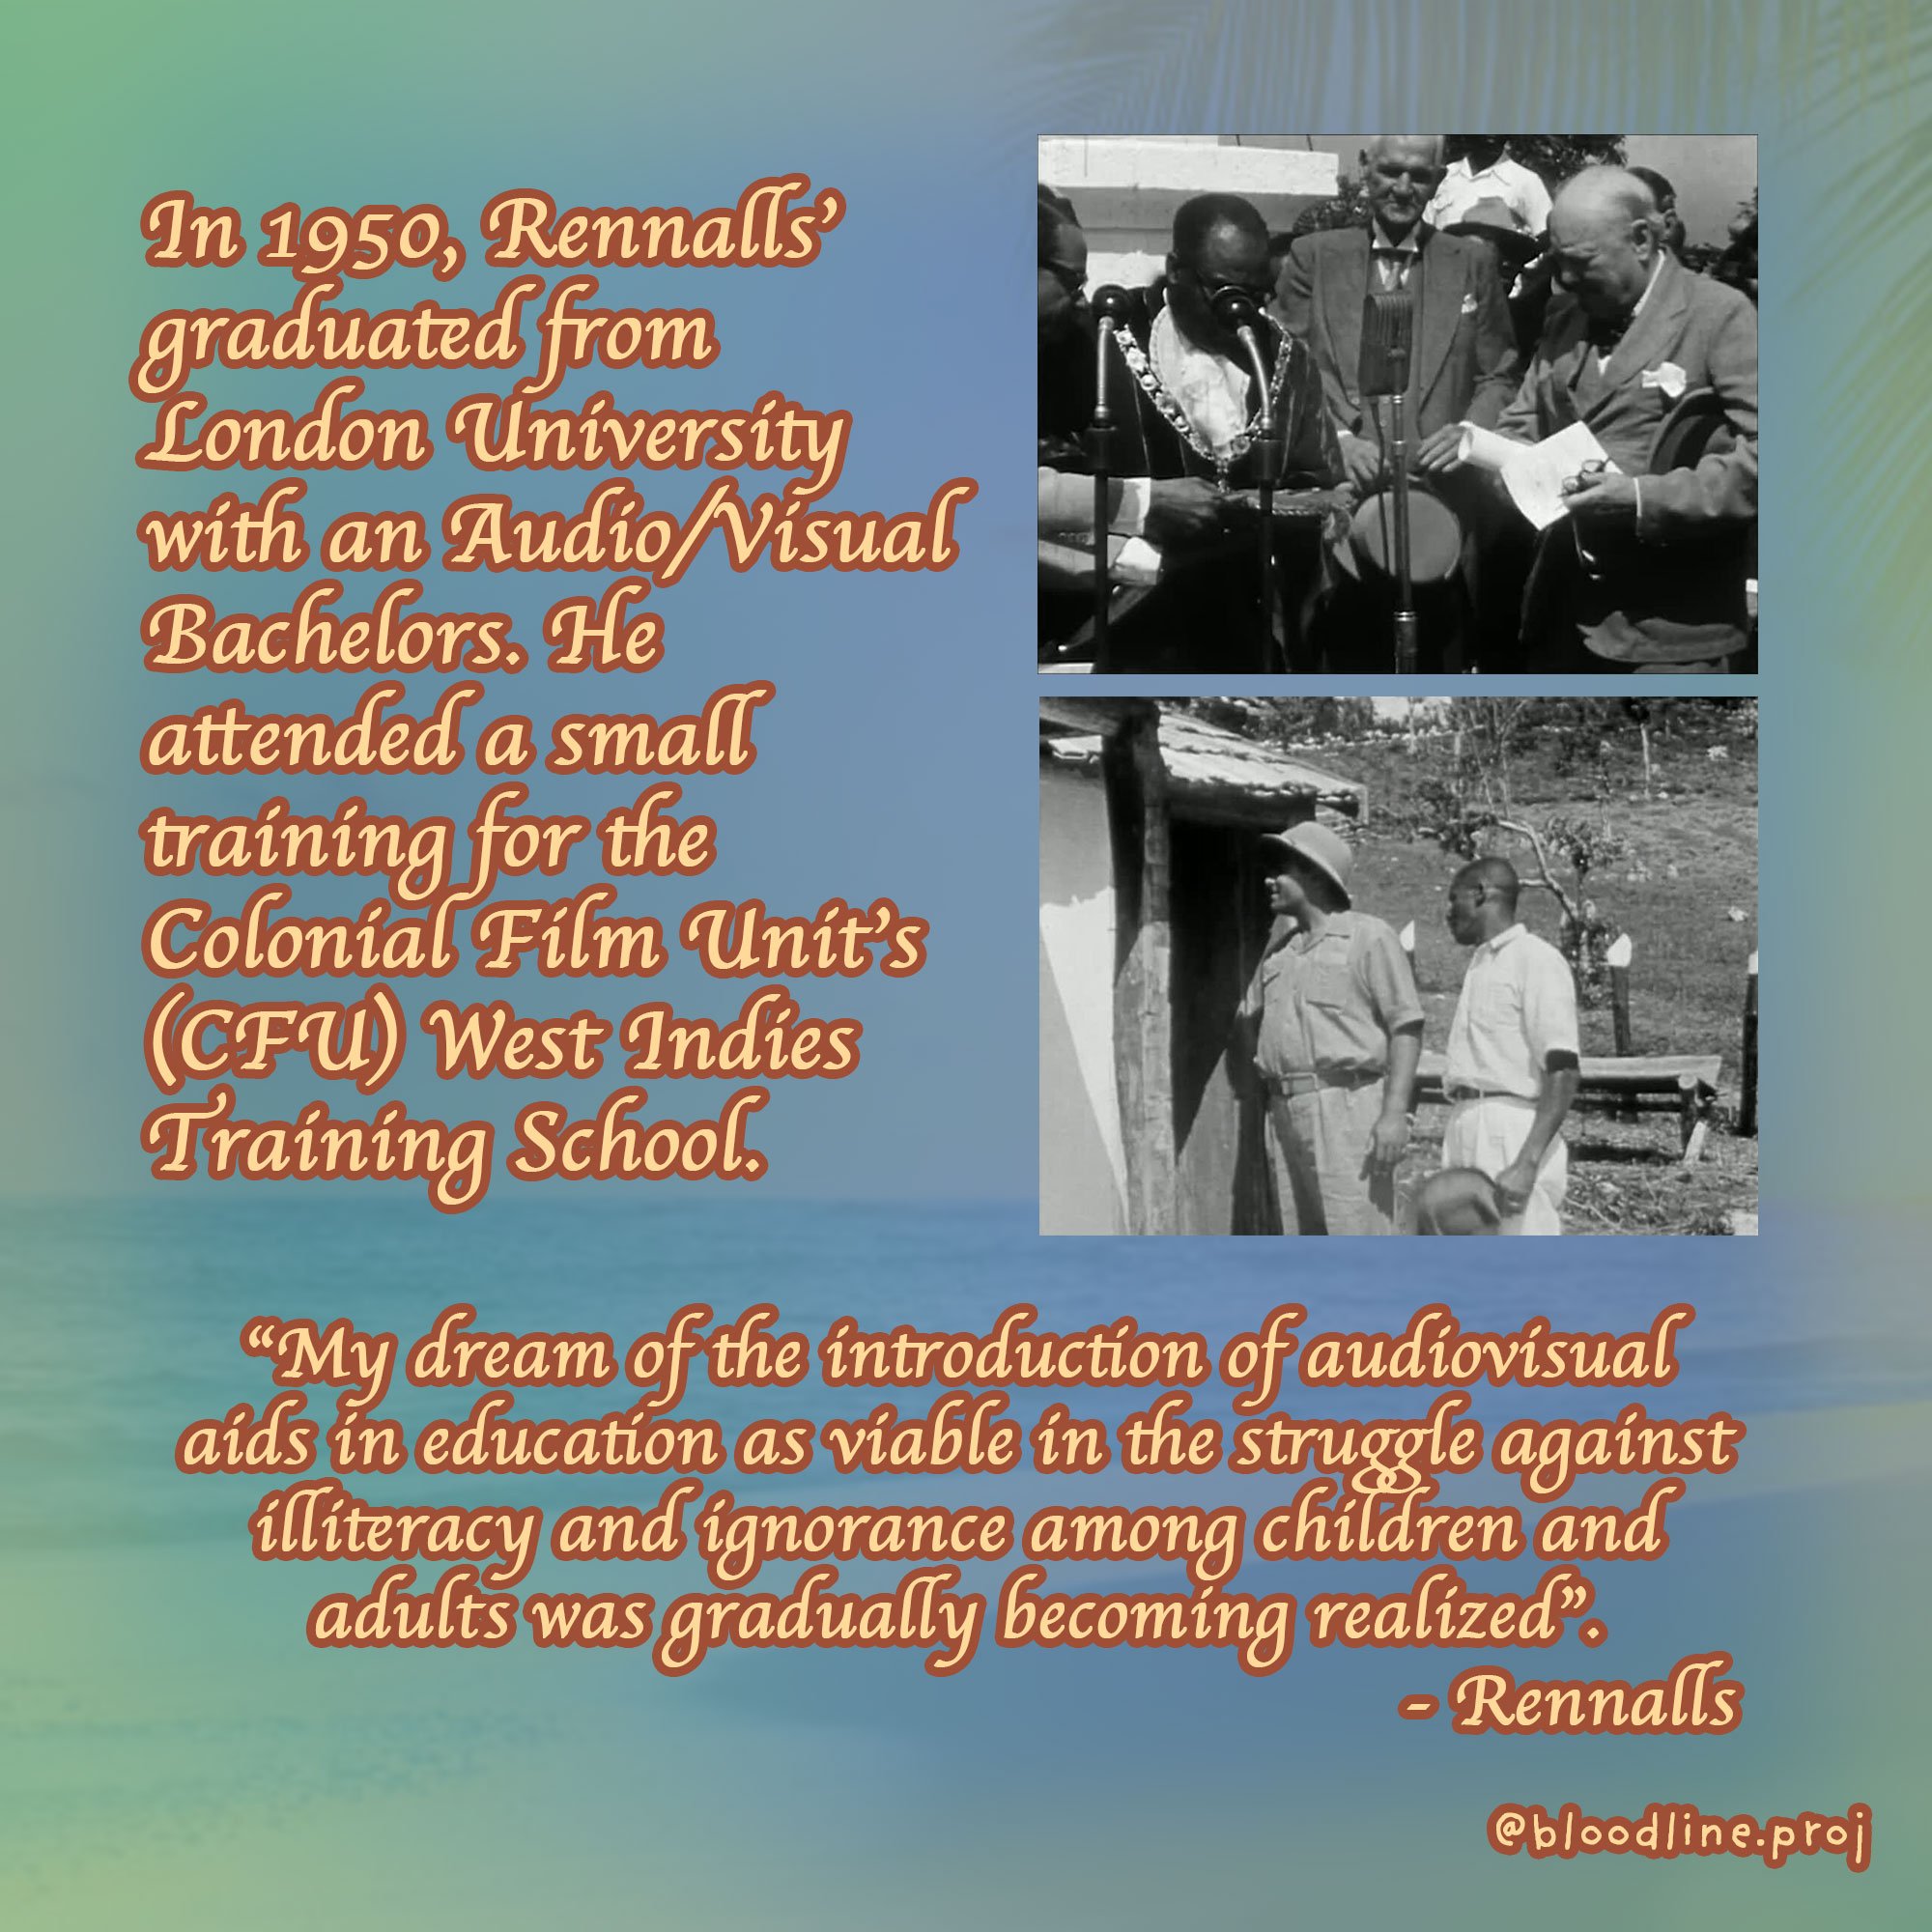  In 1950, Rennalls’ graduated from London University with an Audio/Visual Bachelors. He attended a small training for the Colonial Film Unit’s (CFU) West Indies Training School.  “My dream of the introduction of audiovisual aids in education as viabl